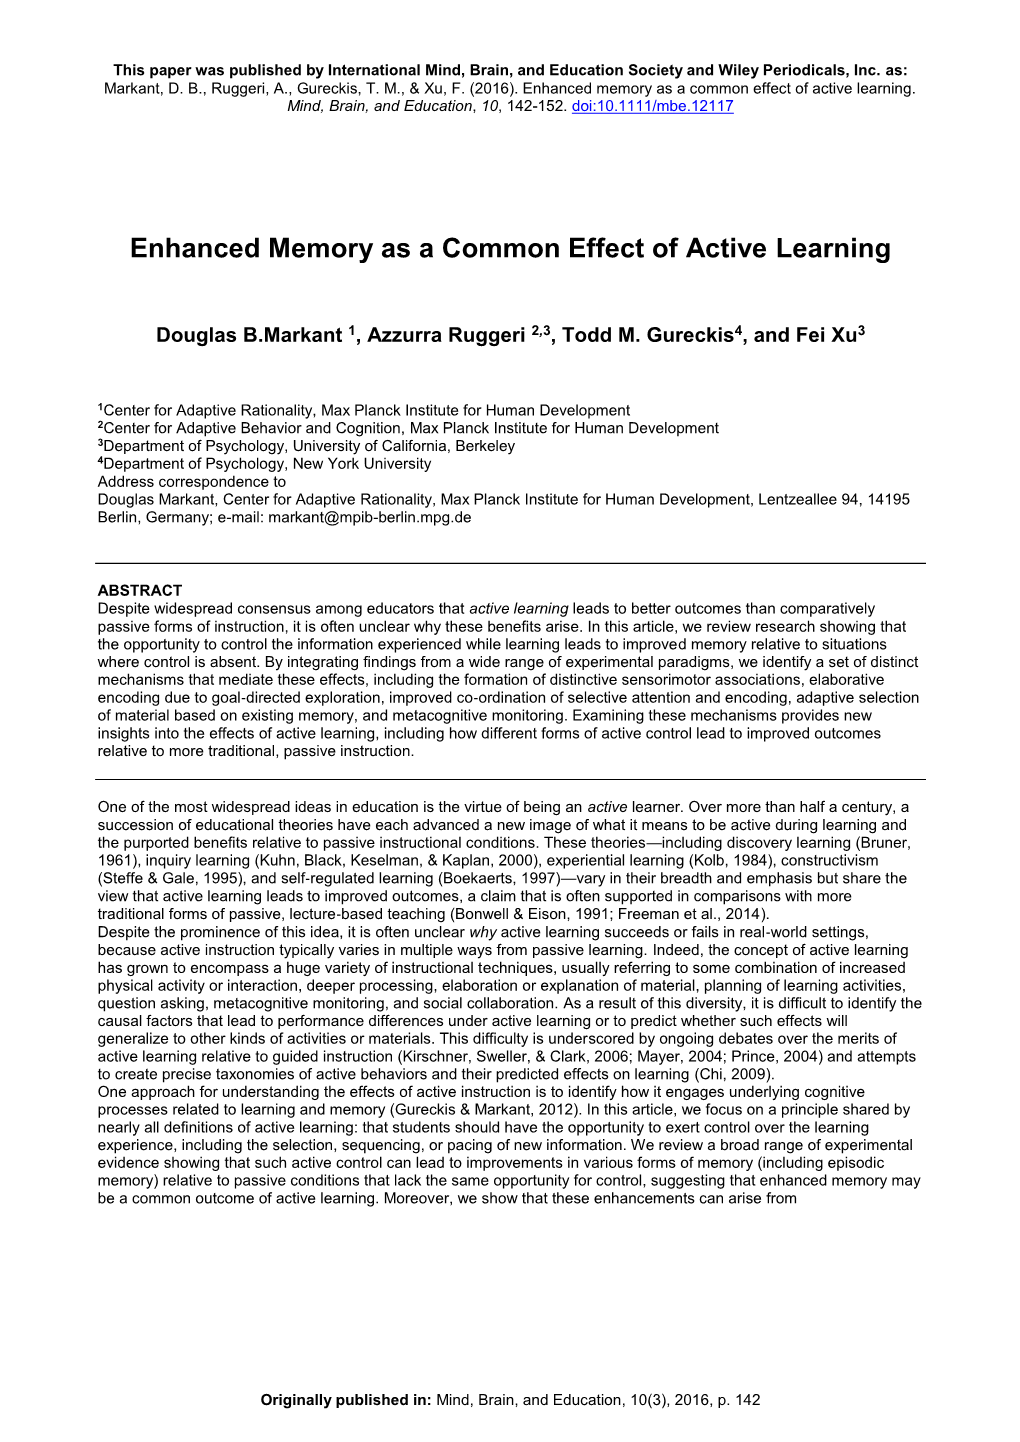 Enhanced Memory As a Common Effect of Active Learning